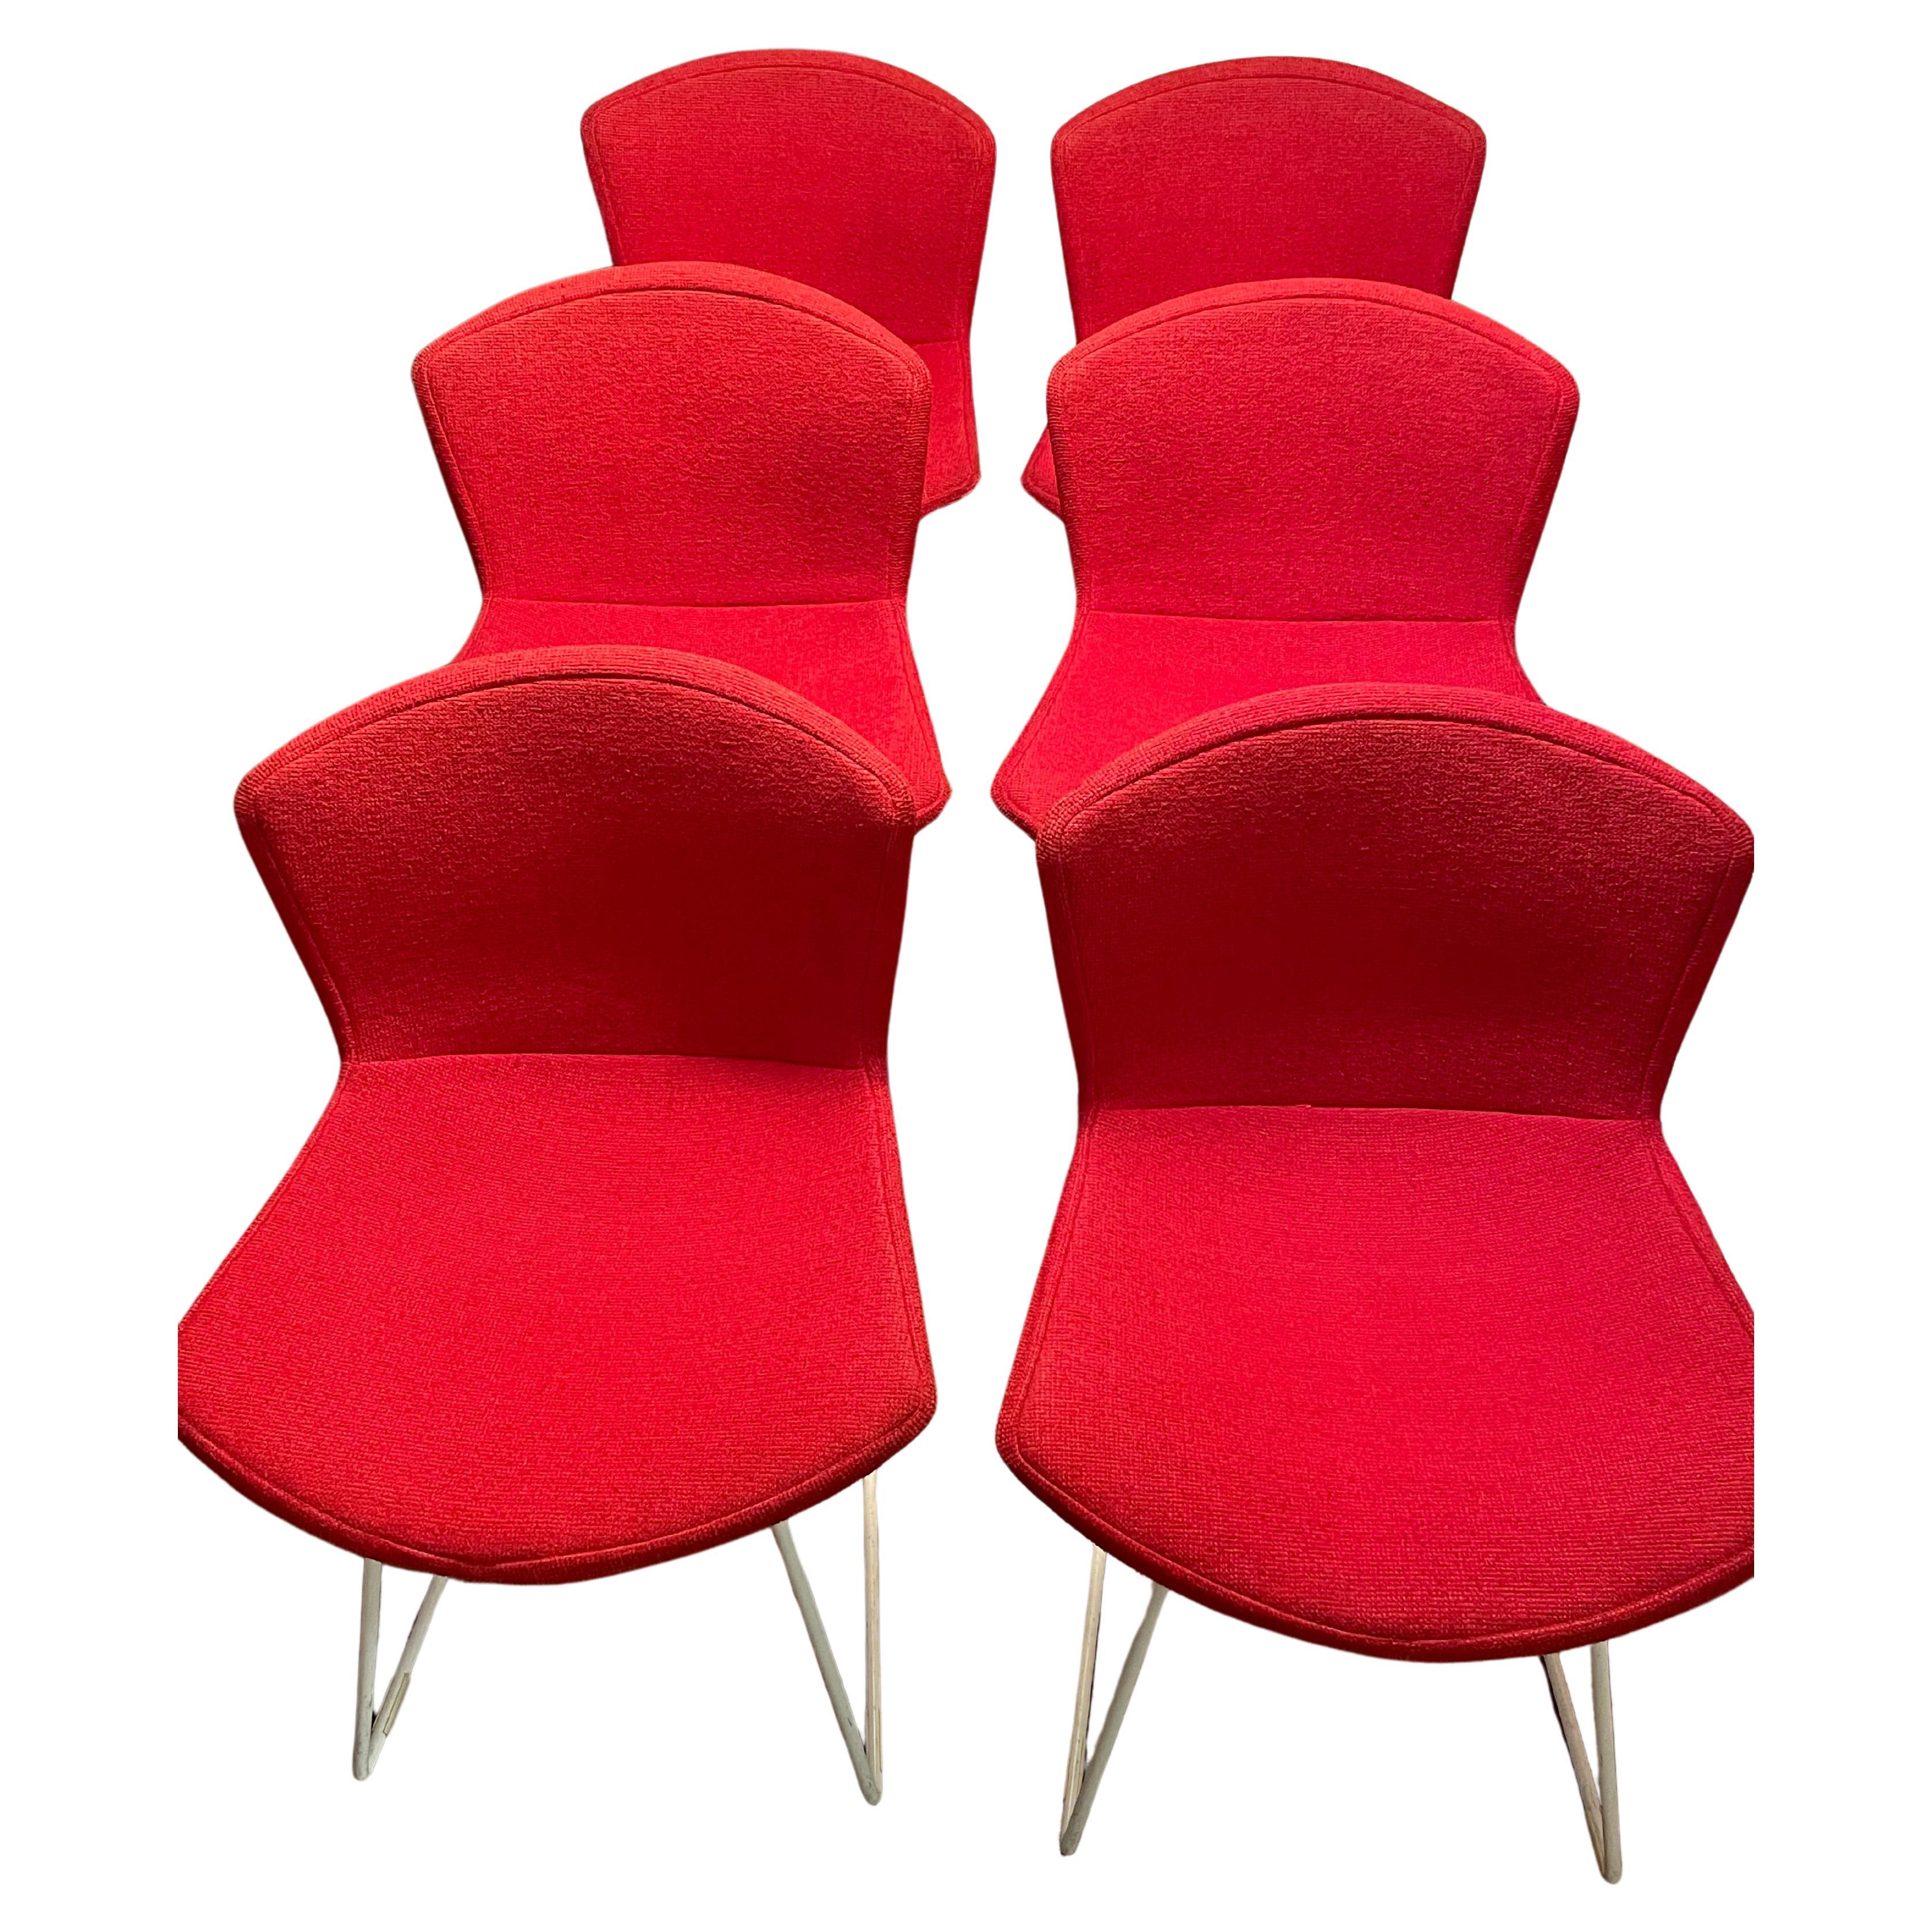 Are Harry Bertoia chairs comfortable?